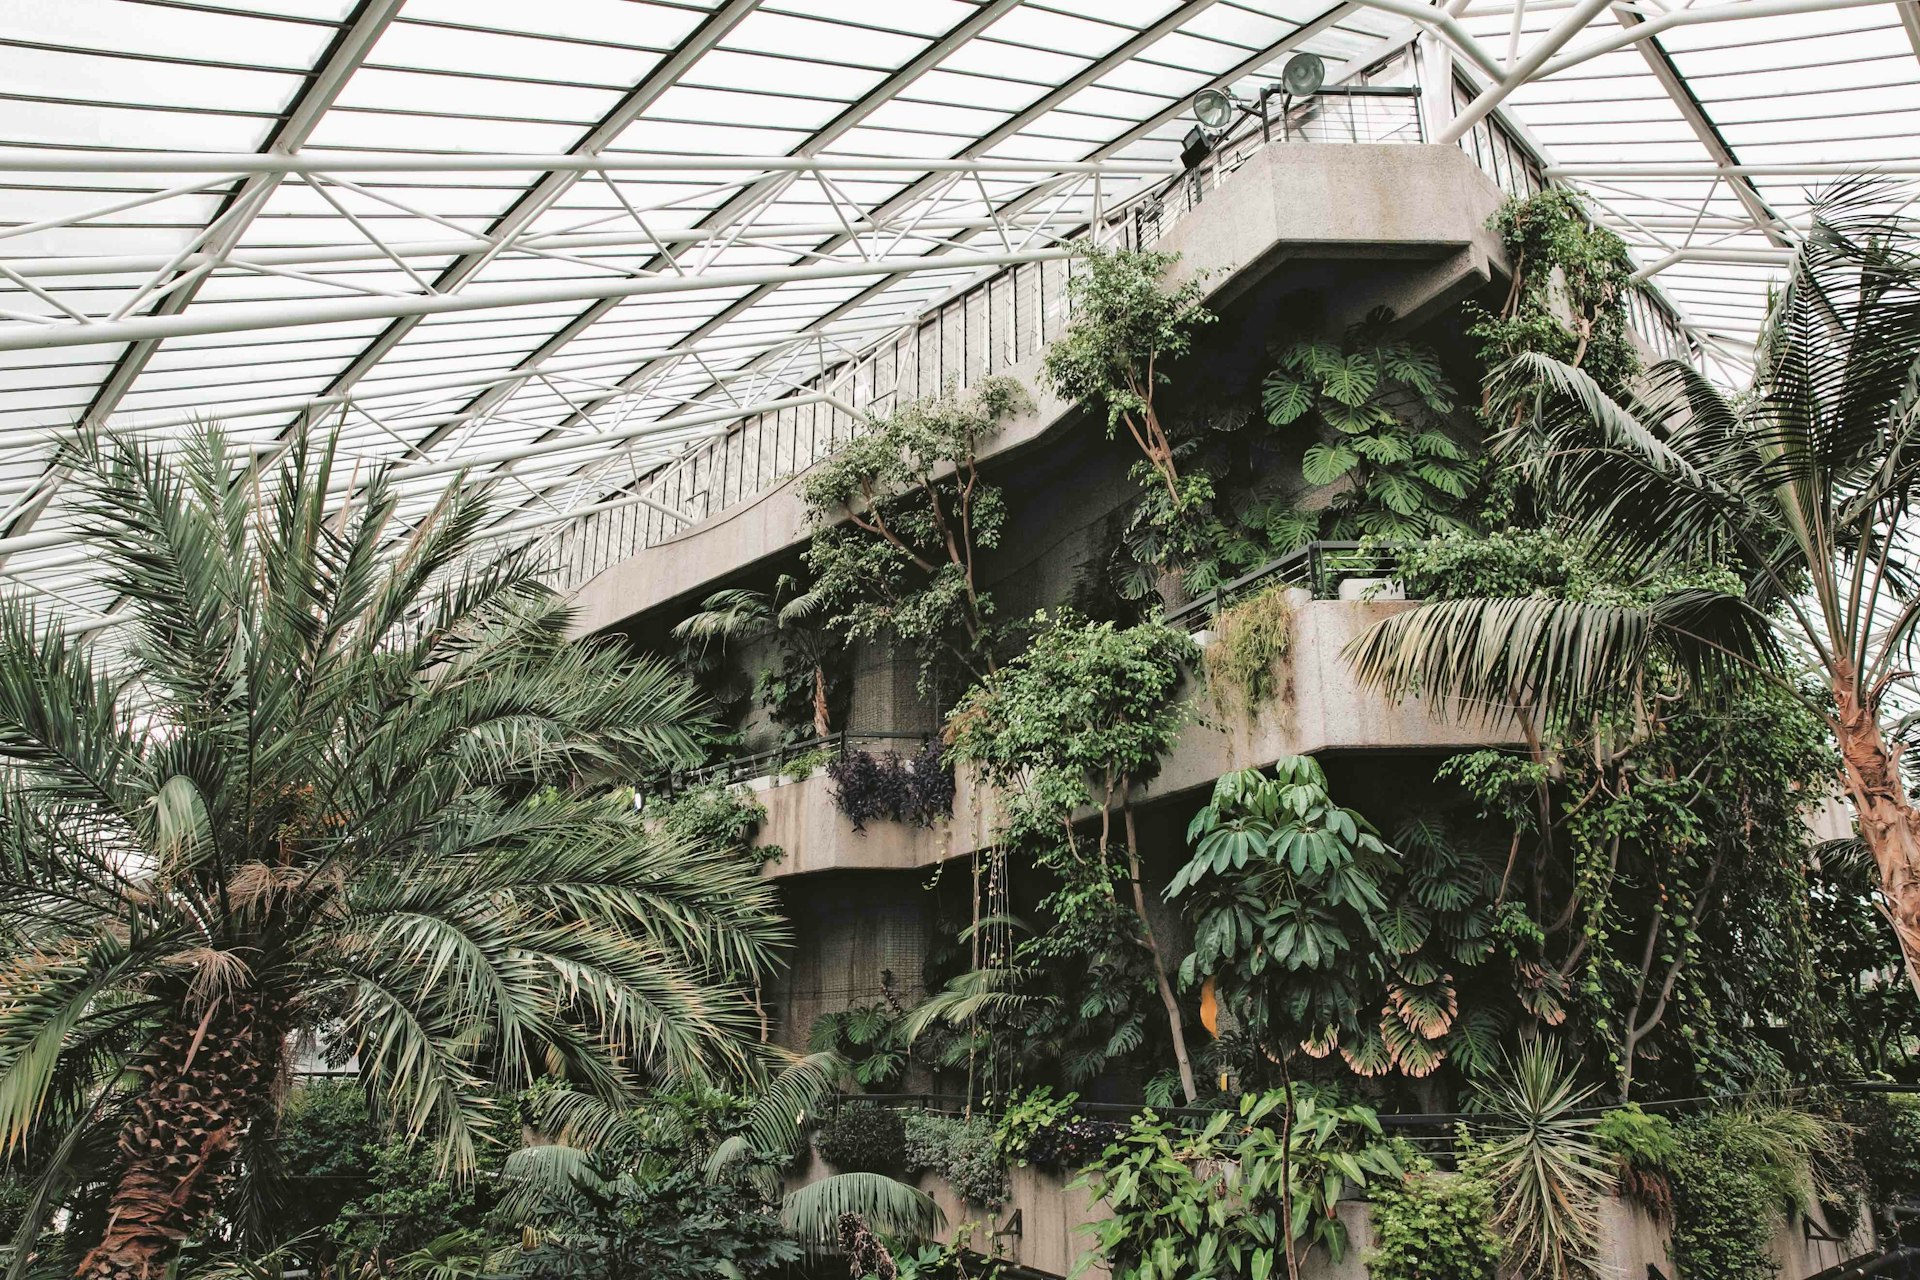 Wholesome photos of the world’s best greenhouses